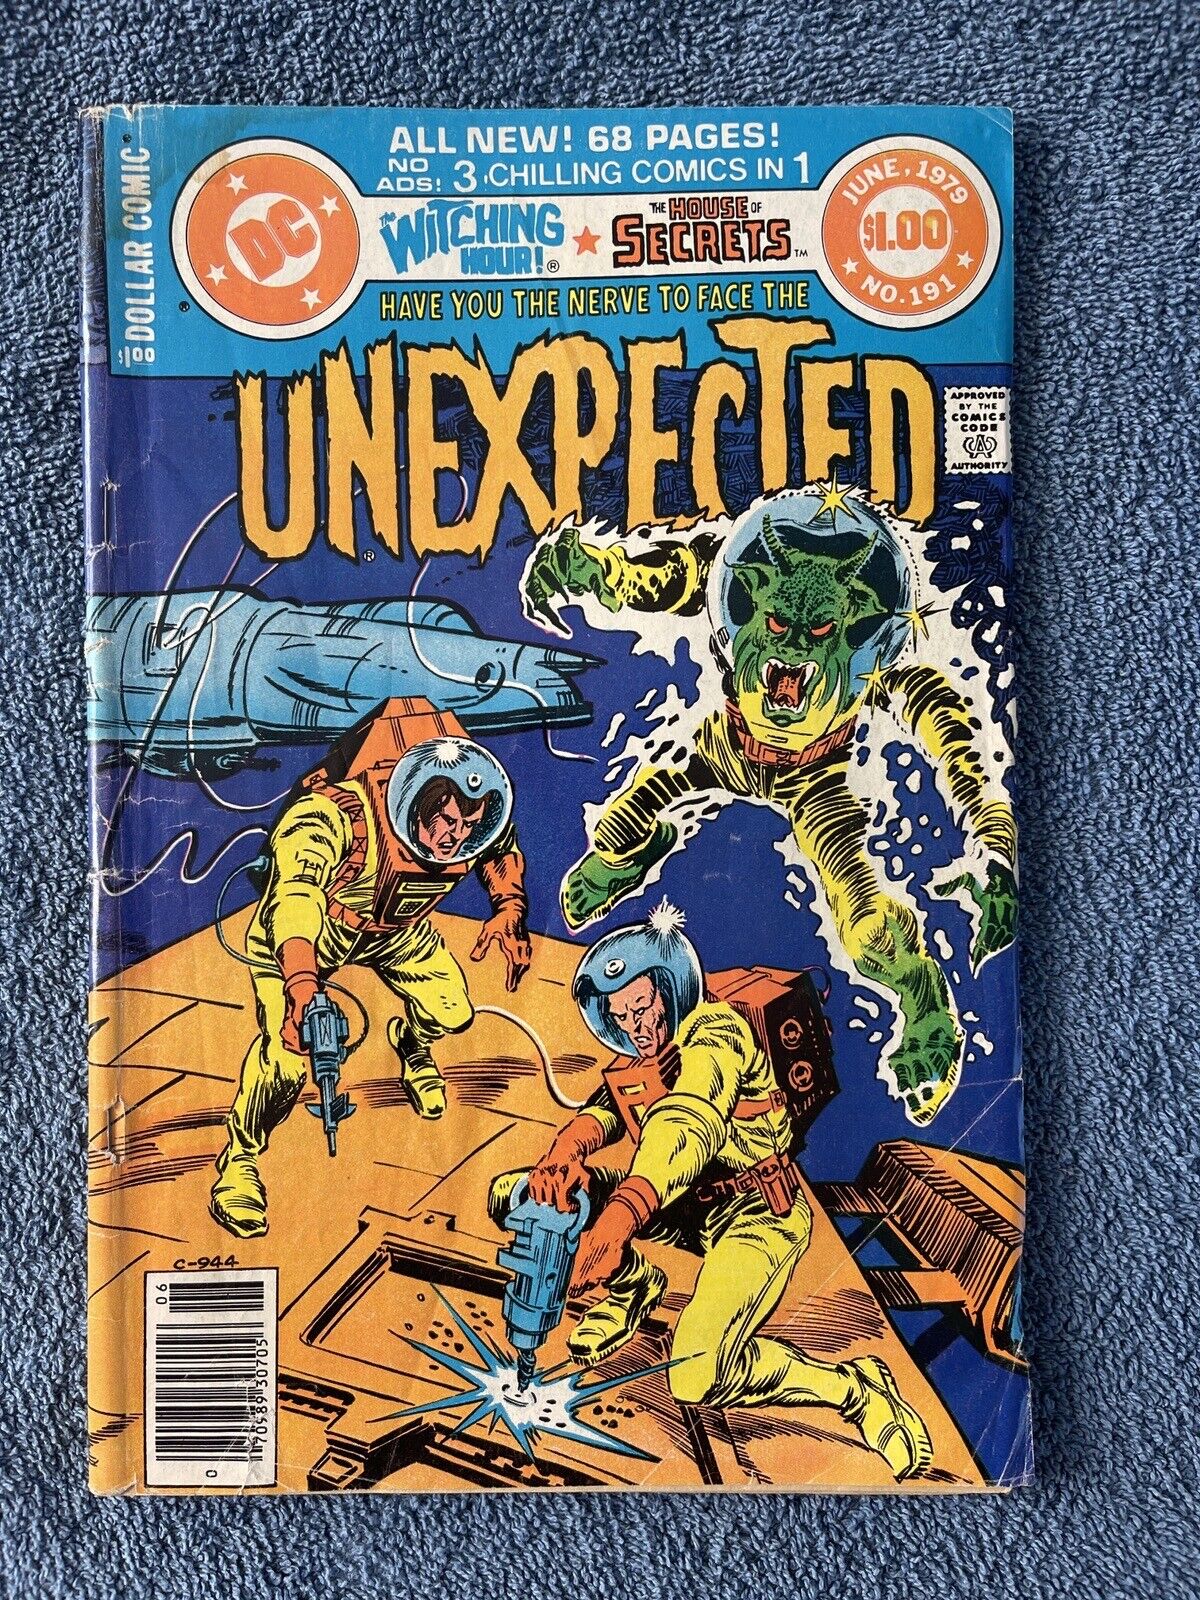 THE UNEXPECTED #191 (DC, 1979) Giant-Size ~ Witching Hour ~ House of Secrets